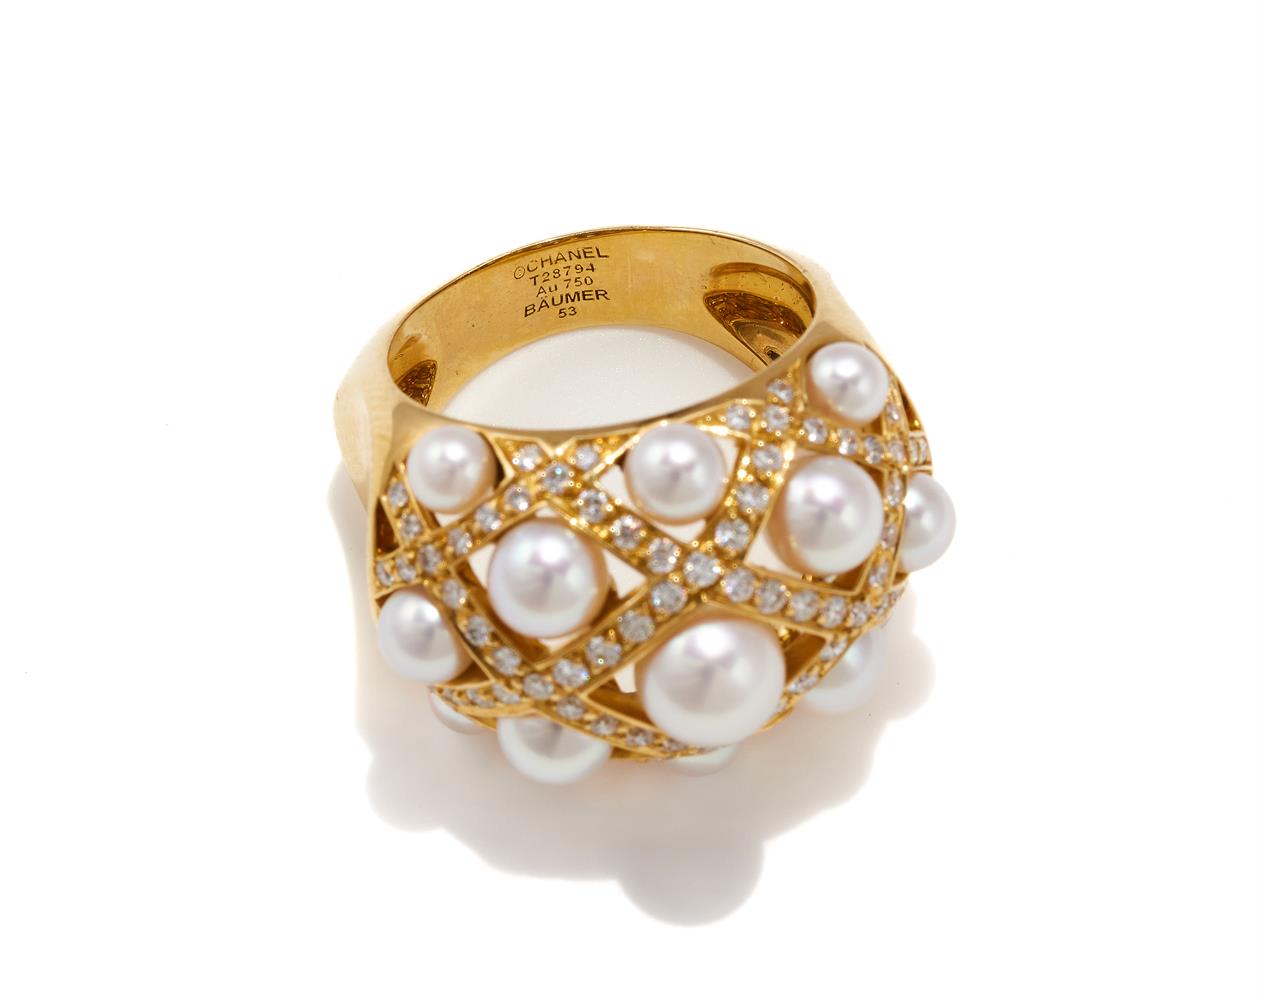 LORENZ BAUMER FOR CHANEL, A DIAMOND AND CULTURED PEARL 'PERLES MATELASSE' RING - Image 2 of 2